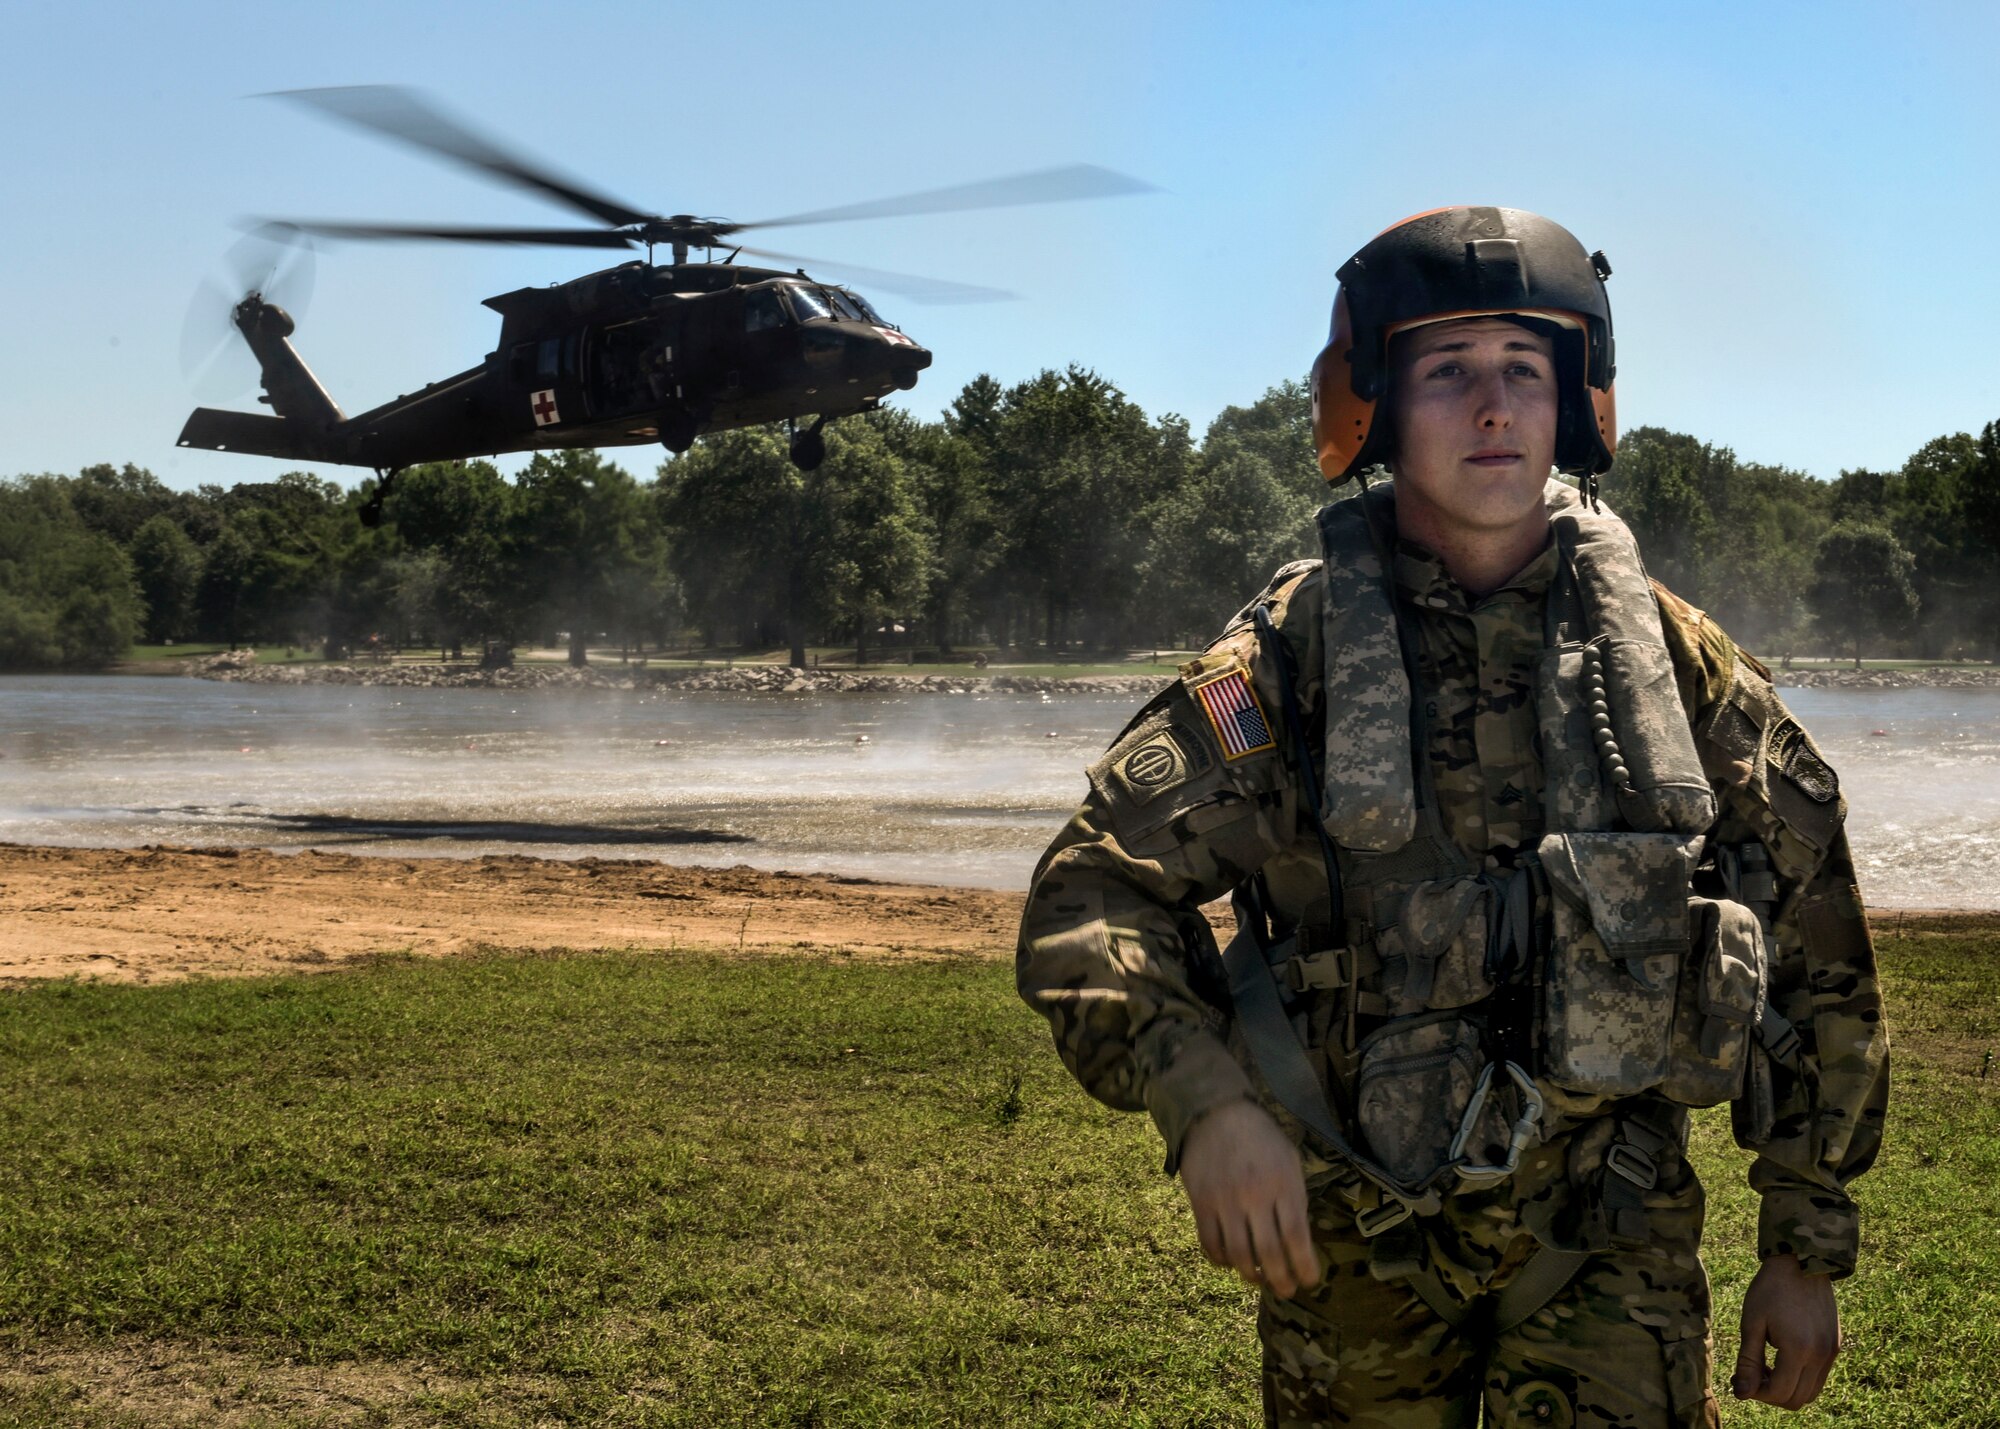 A U.S. Army member of the 6-101st Aviation Regiment from Fort Campbell, Ky. prepares for their unit's first-ever medical evacuation water extraction with Survive, Evade, Resist, and Escape instructors from Scott Air Force Base at Lake Carlyle, Ill., June 7, 2017. Lt. Col. Brooke Matson, 375th Operations Support Squadron, Lt. Col. Brandon Dow, 54th Airlift Squadron, and Maj. Madison Basil Jr., Headquarters Air Mobility Command, received hoist, water survival, and flare training to learn how to survive in aquatic situations long enough to be rescued. The 101st Combat Aviation Brigade has served in almost every single military operation since the Vietnam War, including combat, peacekeeping, and humanitarian.  By partnering with Air Mobility Command’s SERE instructors, this training allows for joint-service coordination while preparing aerial crew members to survive in austere locations after being displaced from their aircraft.  (U.S. Air Force photo by Staff Sgt. Jodi Martinez)